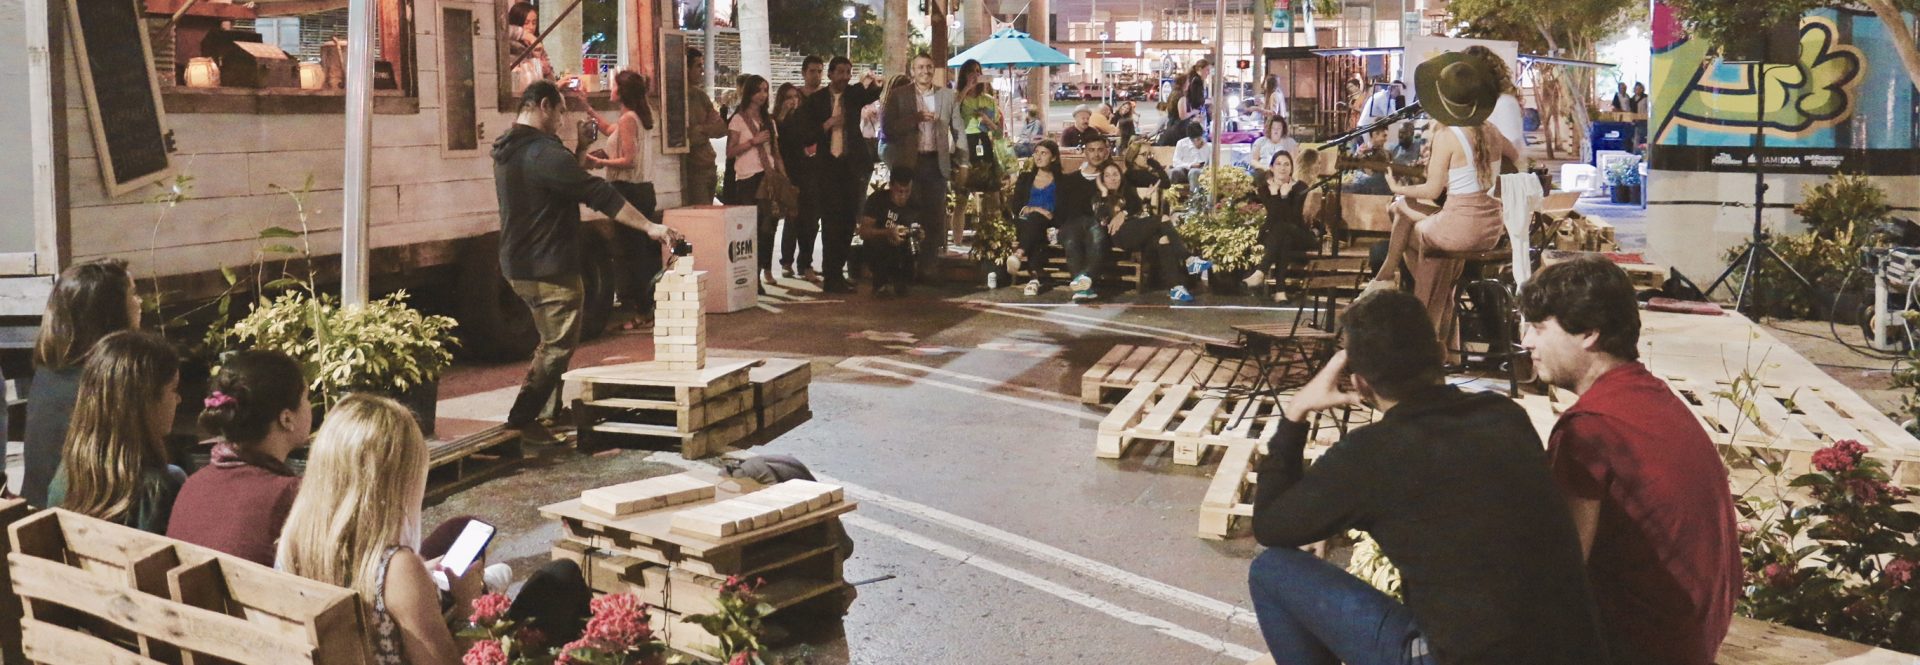 Ottawa Citizen: How tactical urbanism can transform cities, one small change at a time